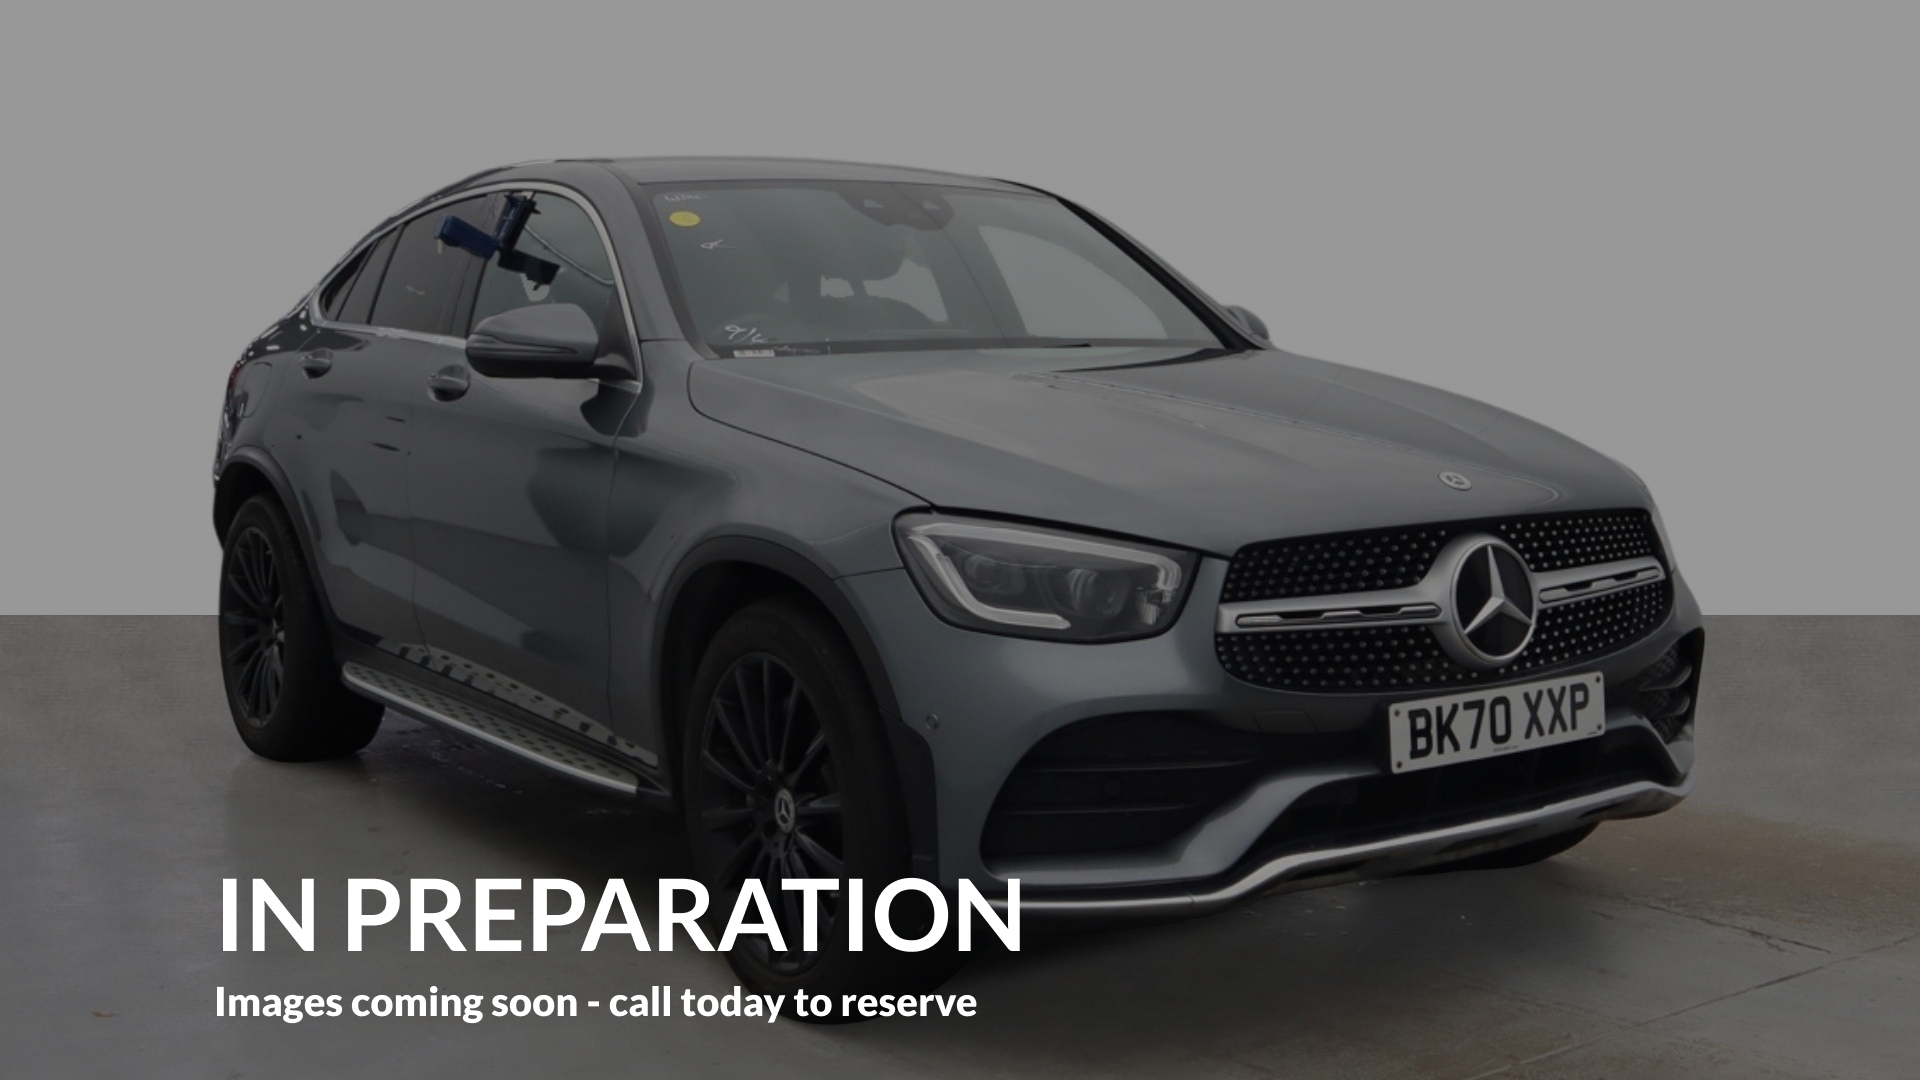 2020 used Mercedes-Benz Glc Coupe GLC 220d 4Matic AMG Line Premium 5dr 9G-Tronic